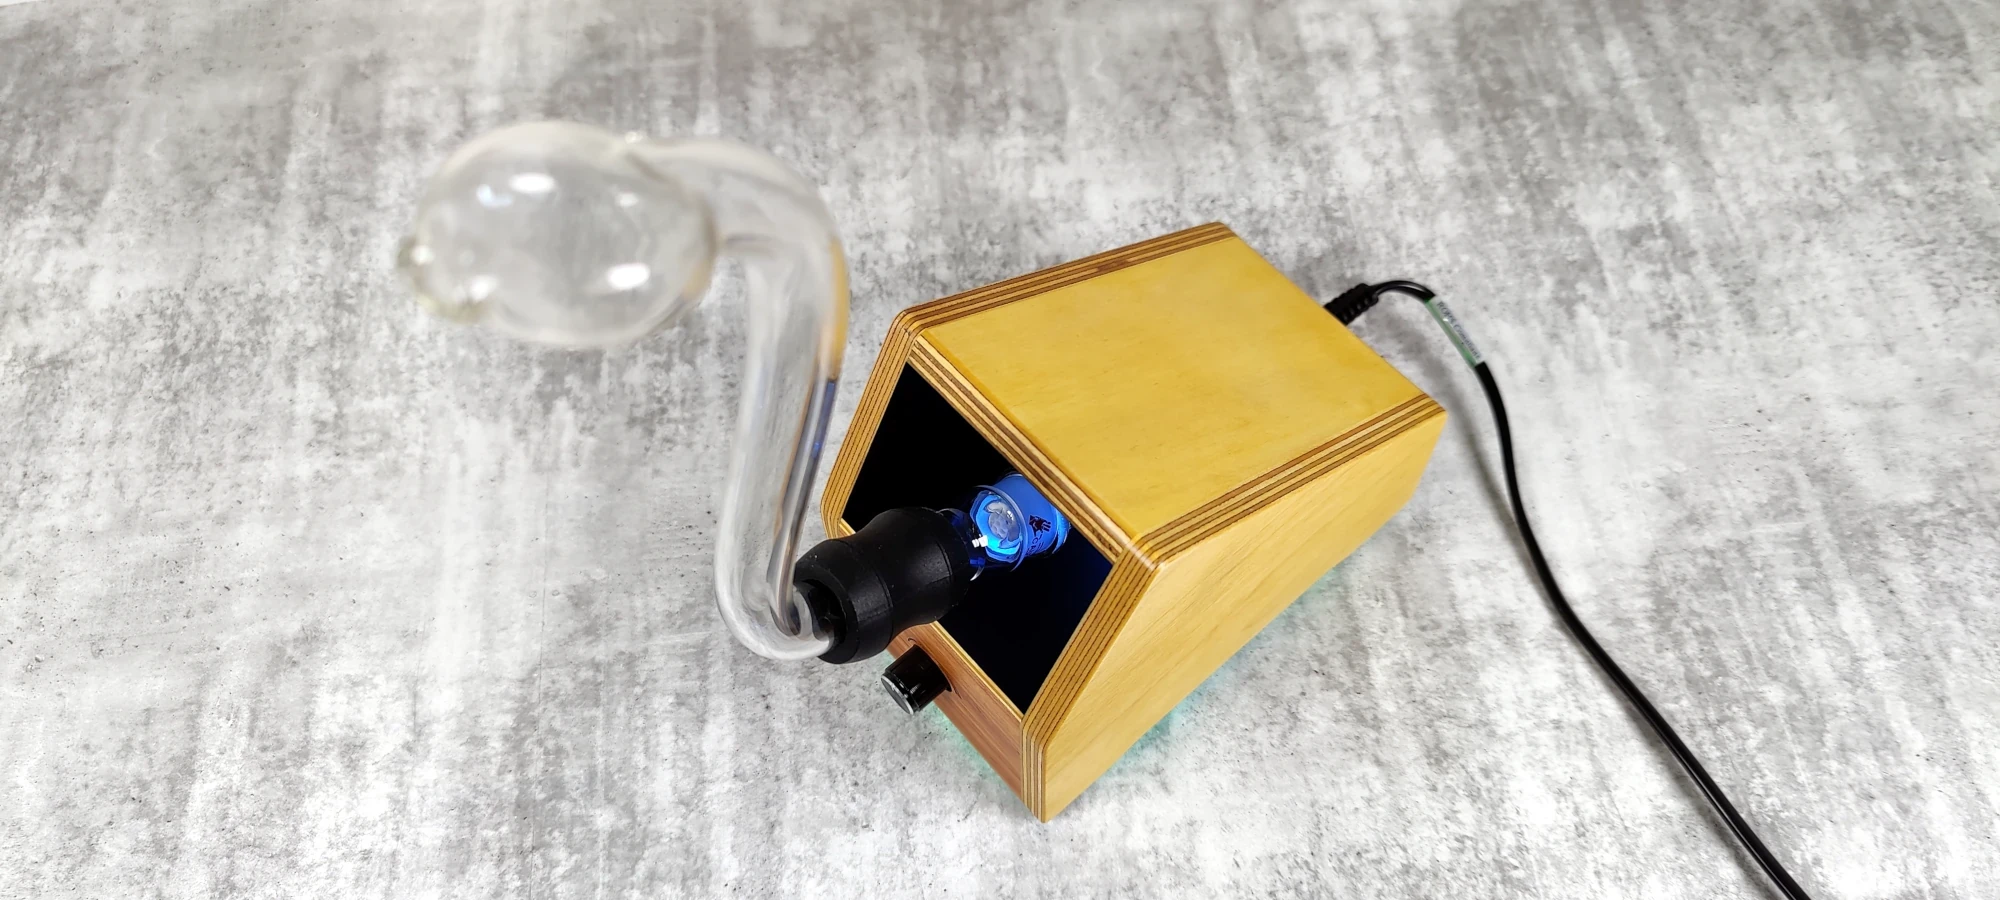 Vaporbrothers VB 1.5 turned on with glass whip attached